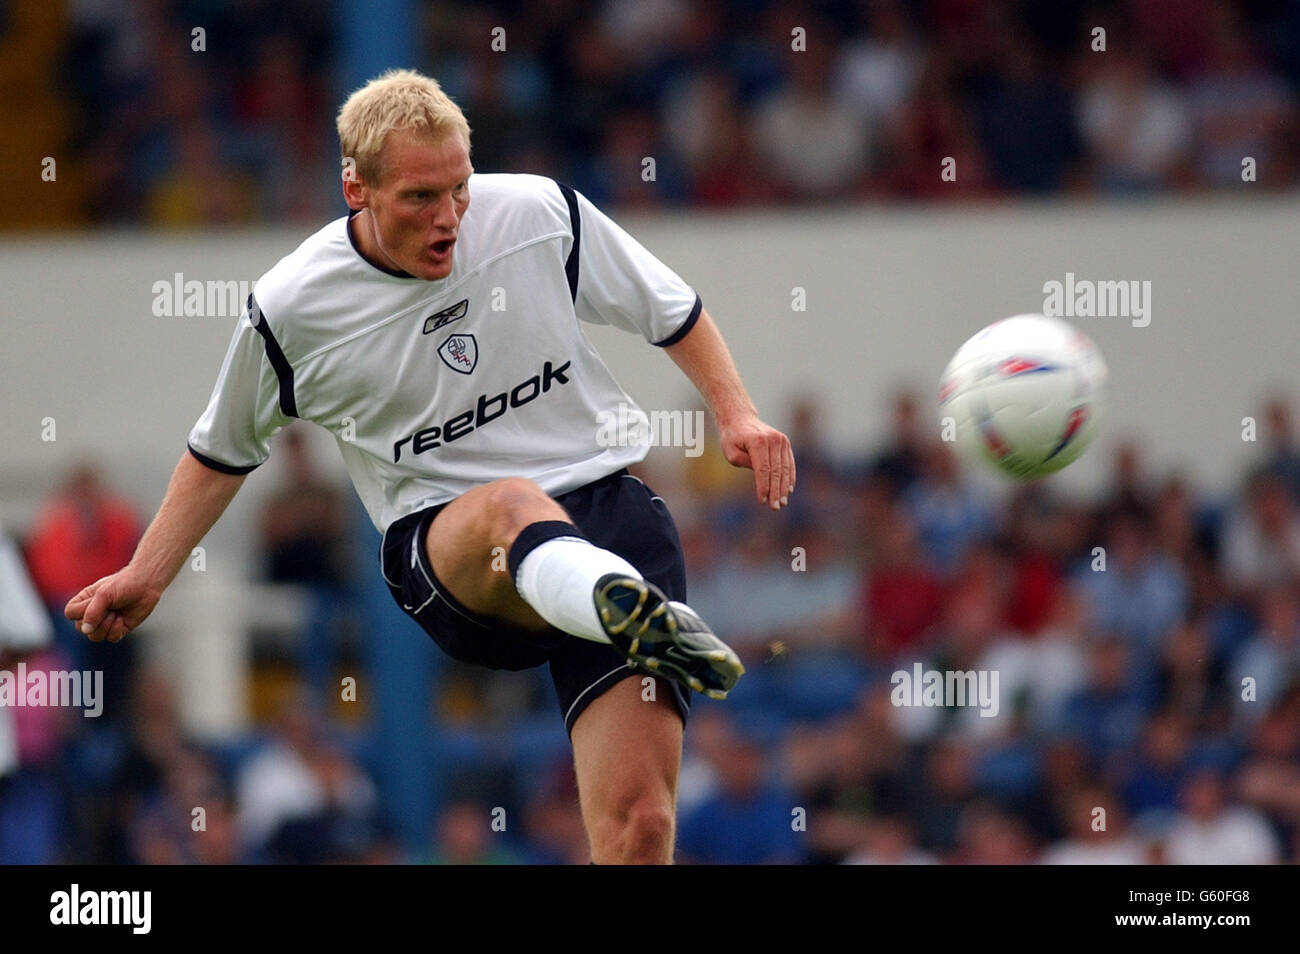 Per Frandsen in action for Bolton Wanderers during their pre-season friendly game between Cardiff City and Bolton Wanderers at Ninian Park, Cardiff. Stock Photo